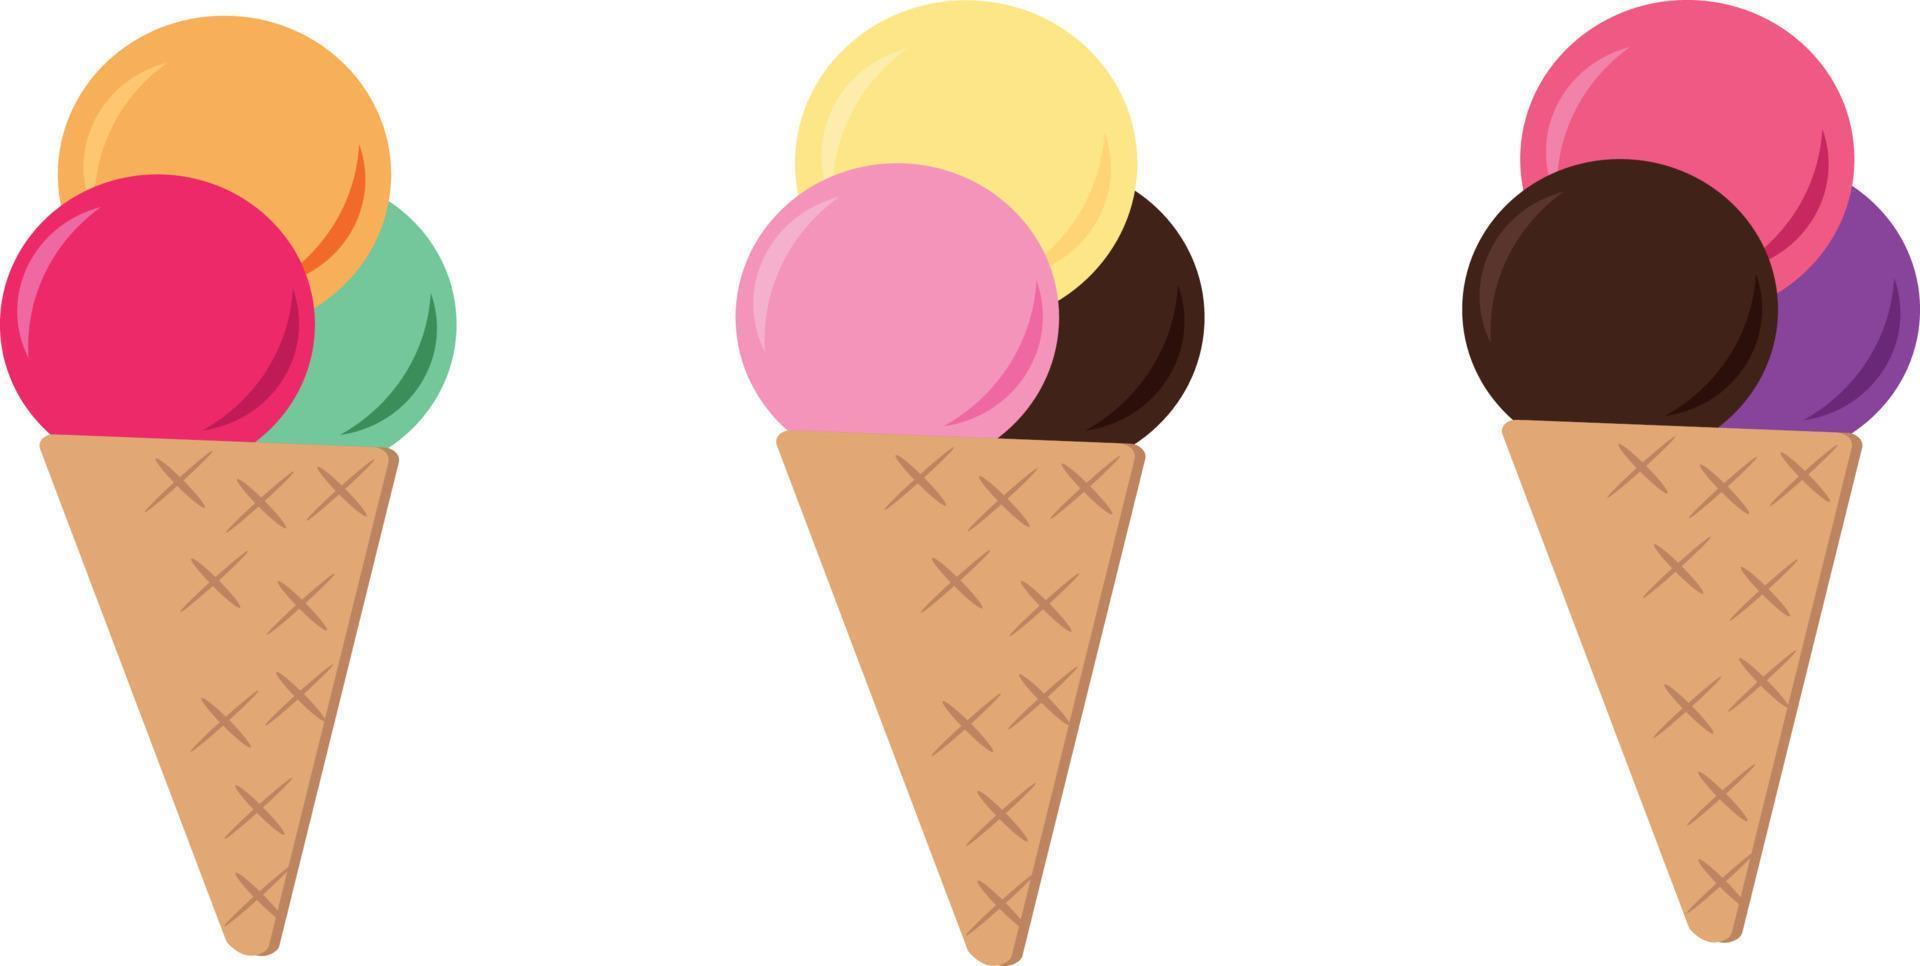 ice cream in a waffle cone. multi-colored balls. set of elements in flat style, sweet dessert vector